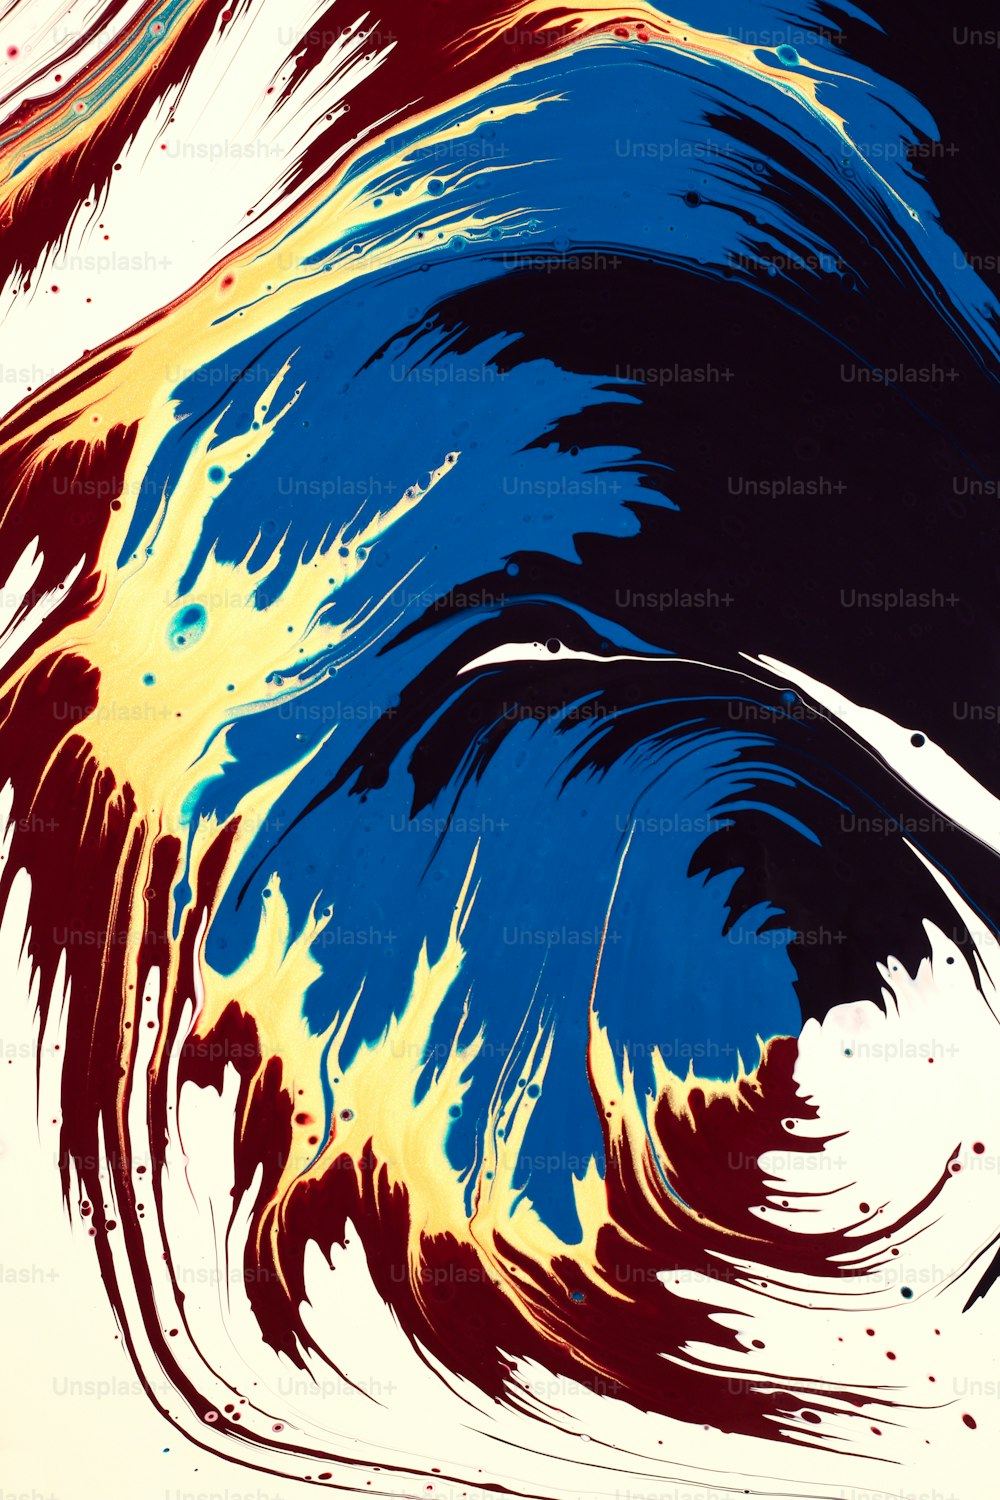 an abstract painting of blue, yellow, and red swirls